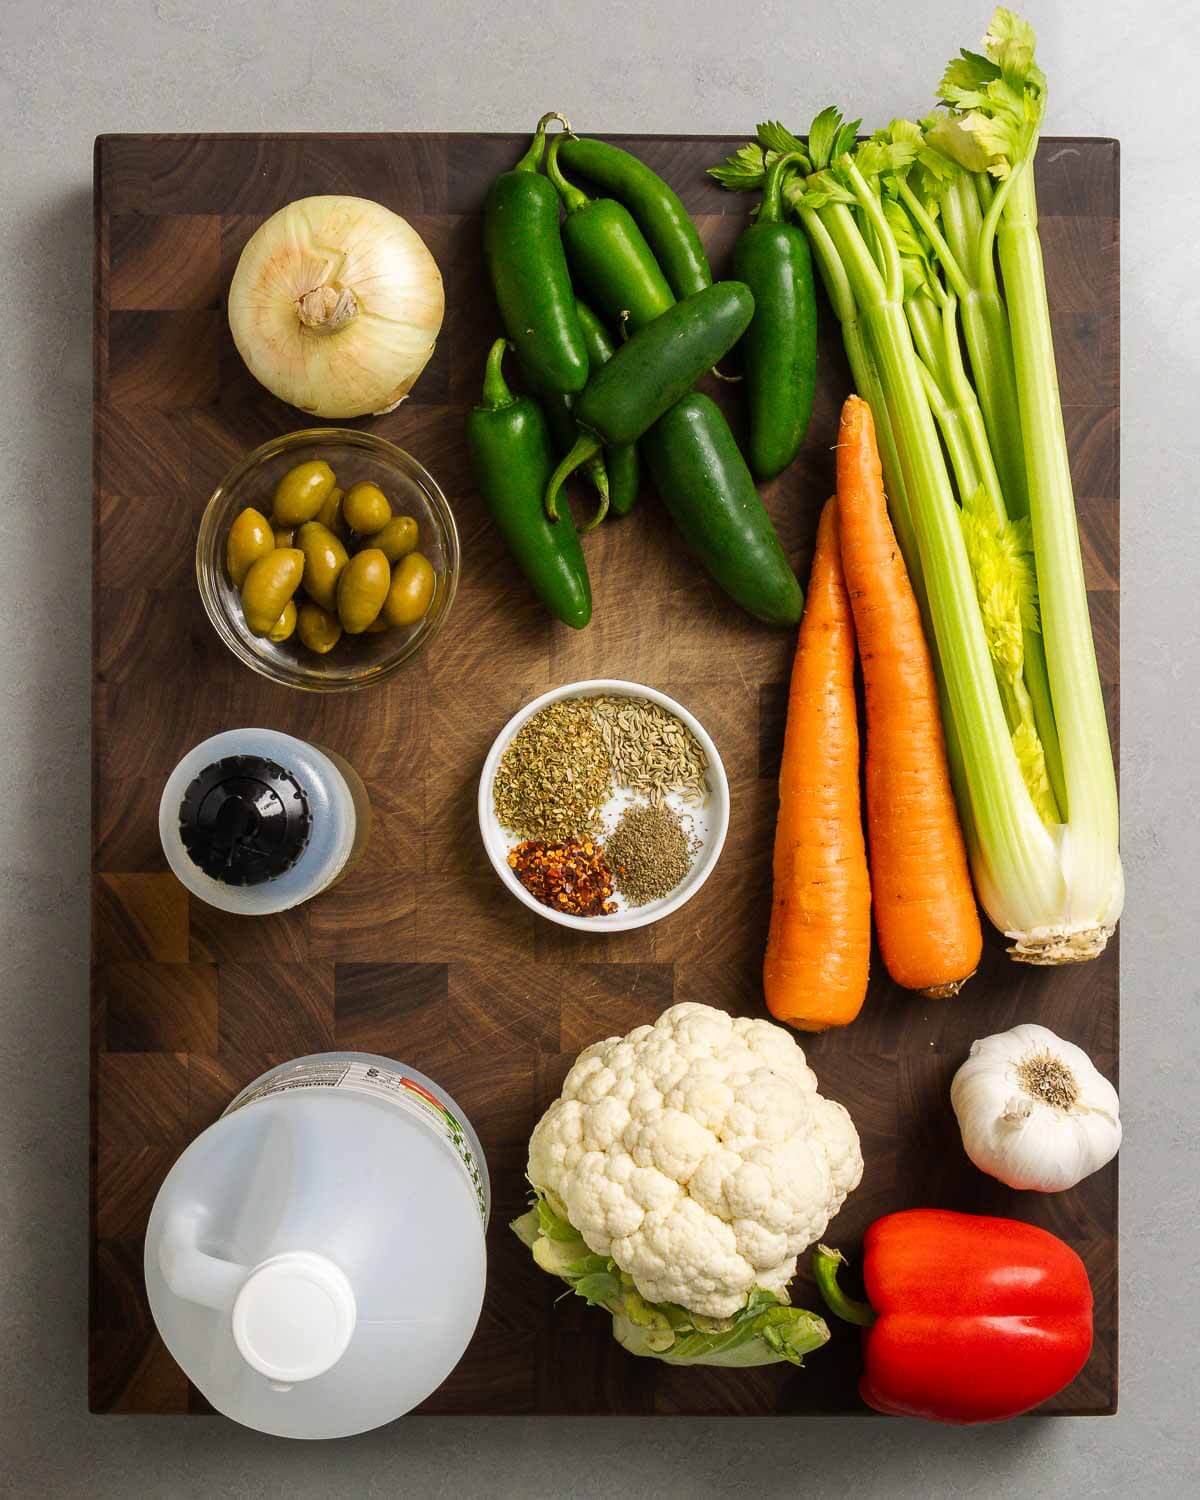 Ingredients shown: onion, hot peppers, carrot, celery, olives, olive oil, spices, vinegar, cauliflower, garlic, and bell pepper.